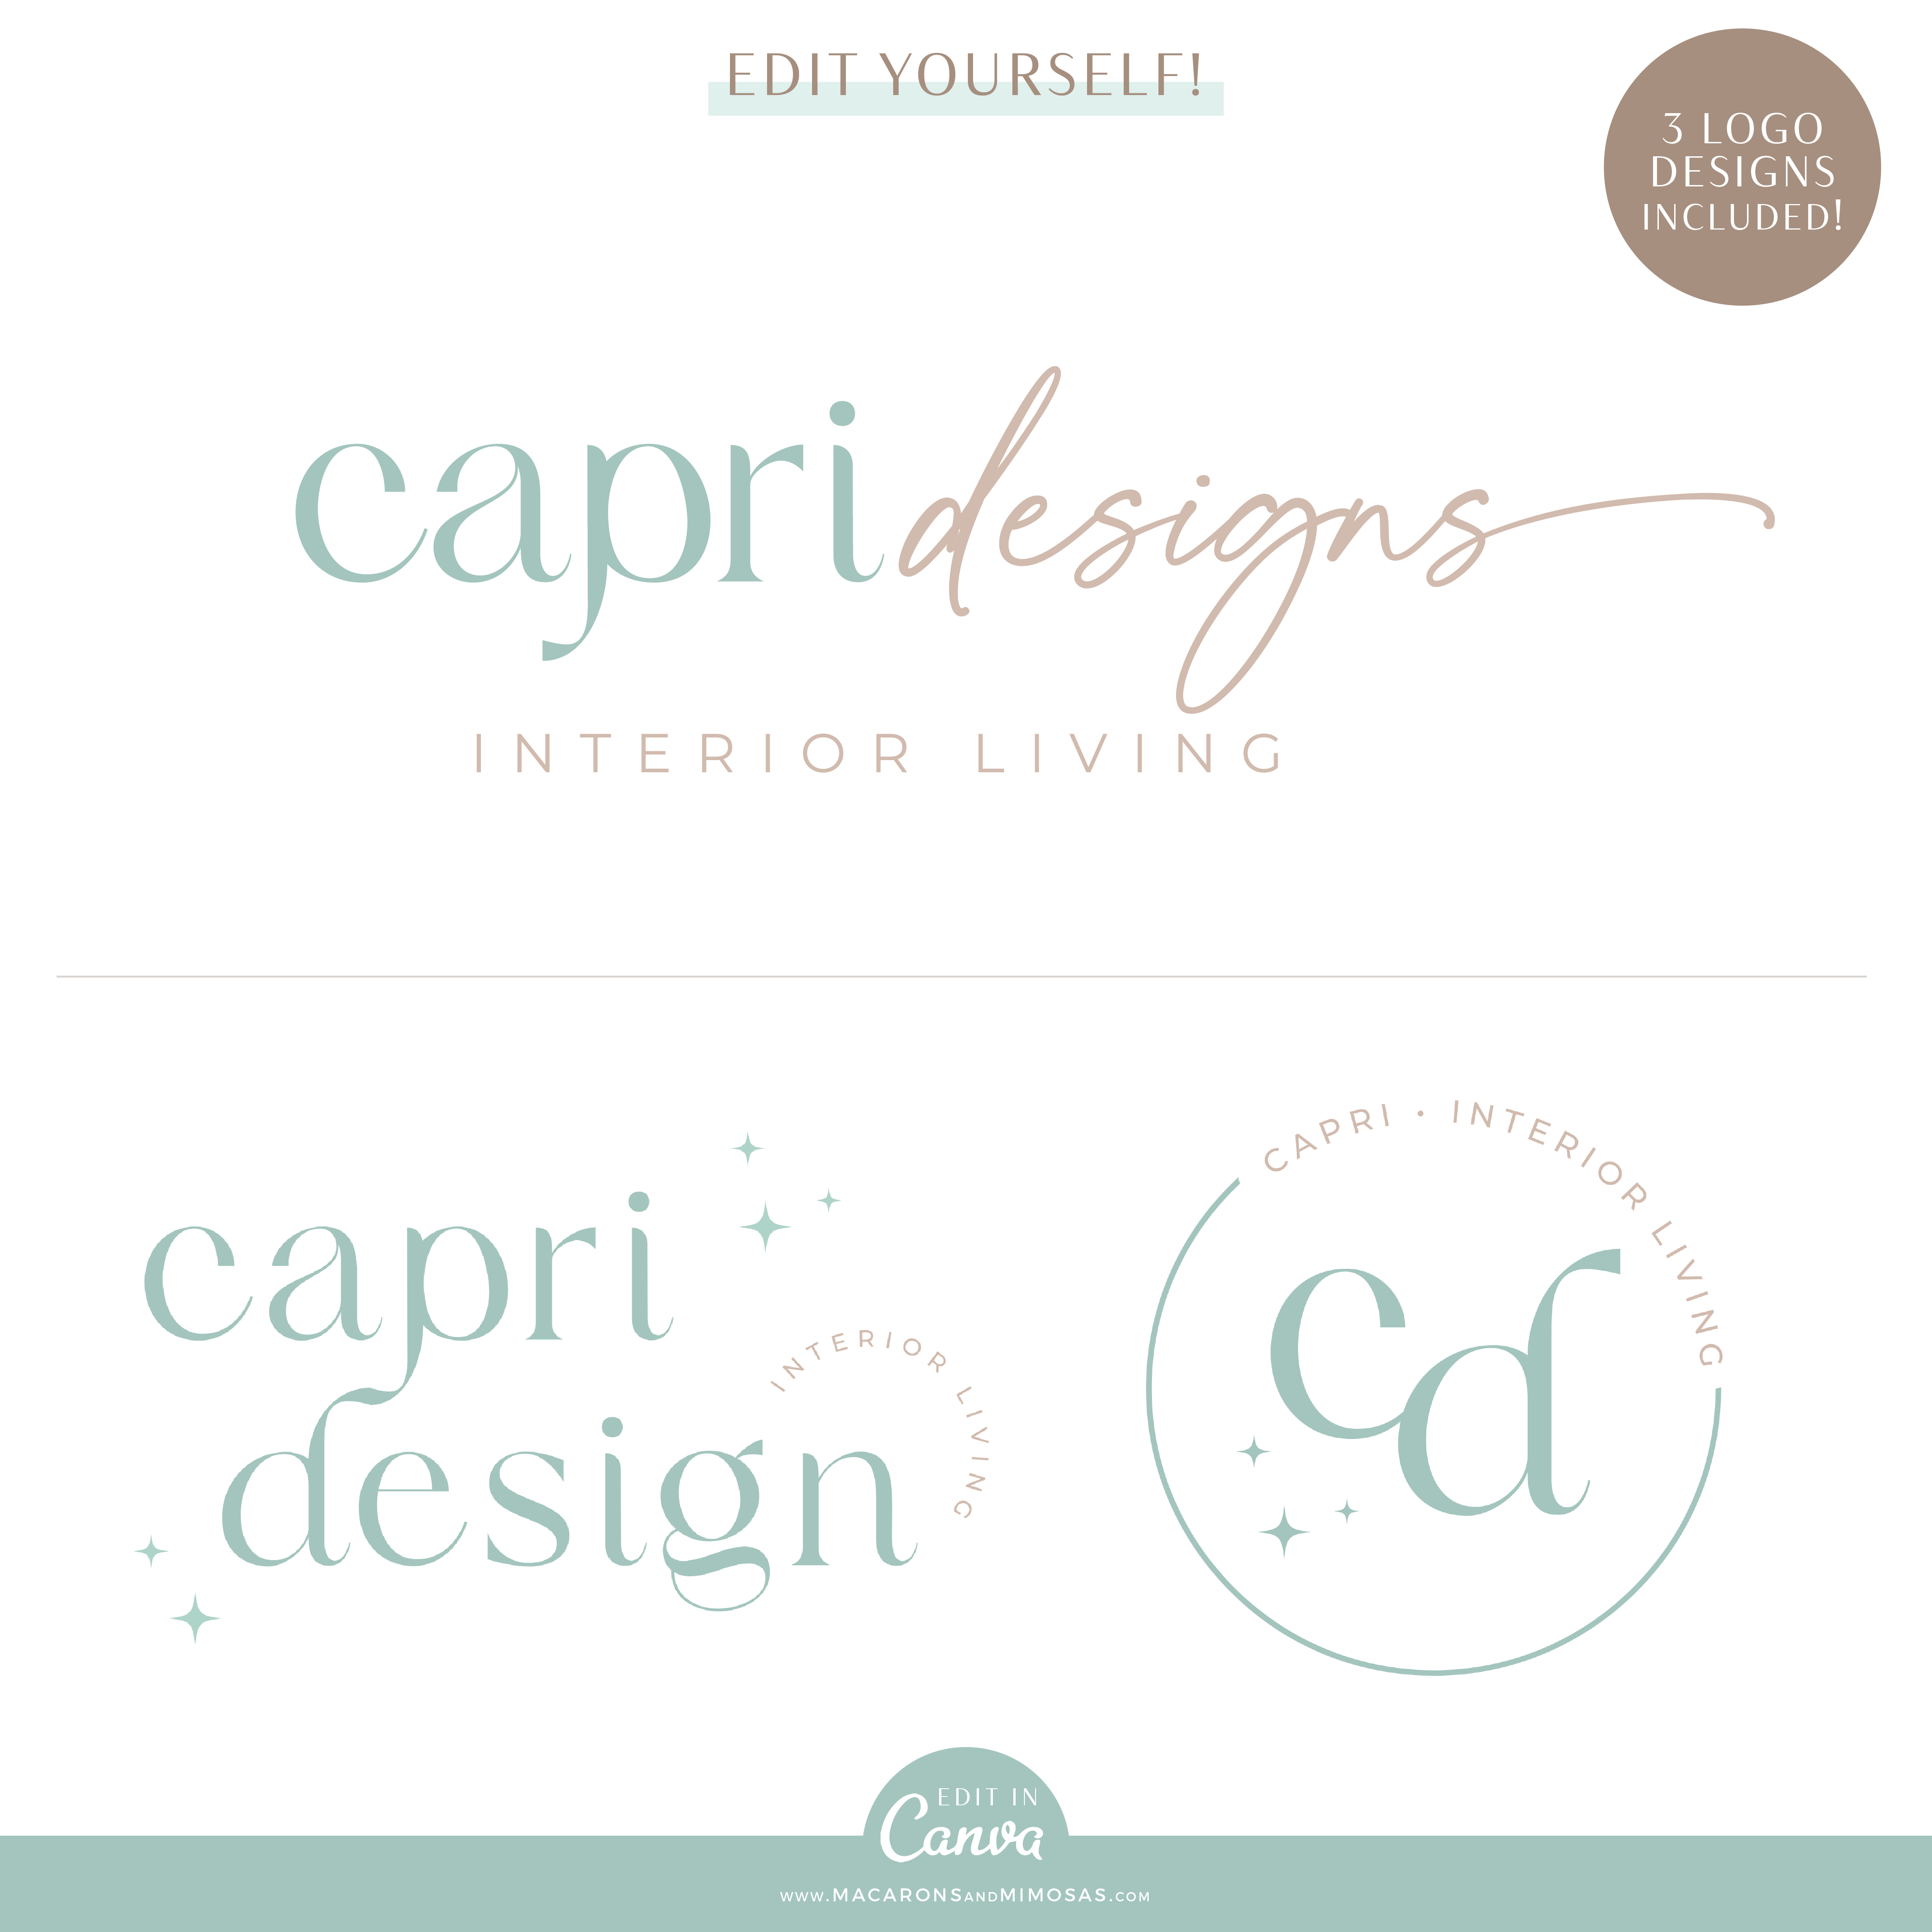 DIY Canva editable logo branding kit with free brand board template. Custom mint green logo to style your brand and business professionally.